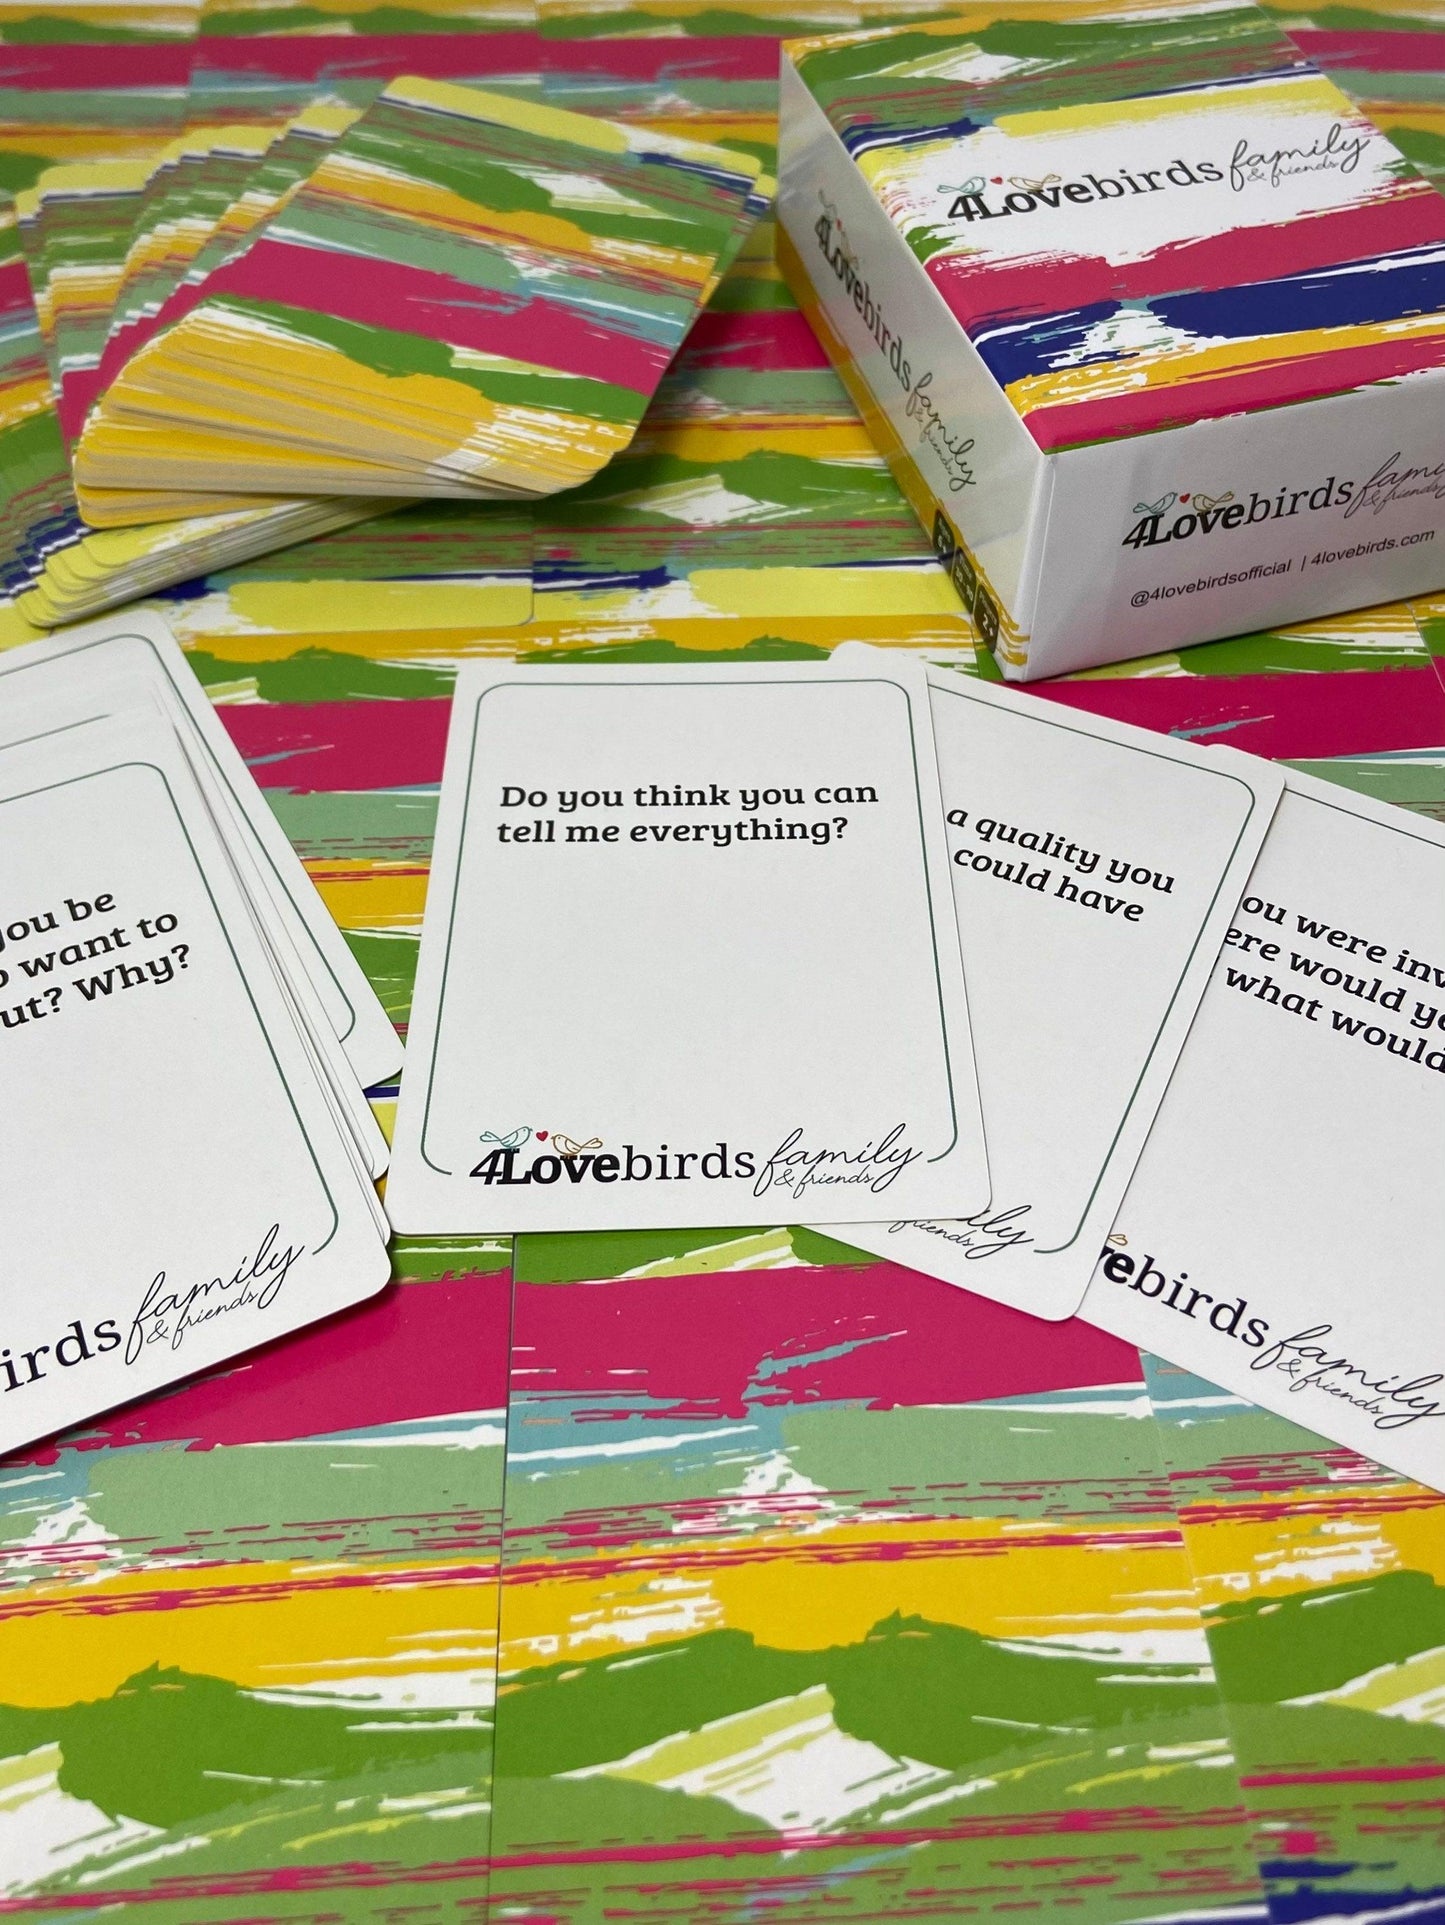 Conversation Starters for Family and Friends - 4Lovebirds